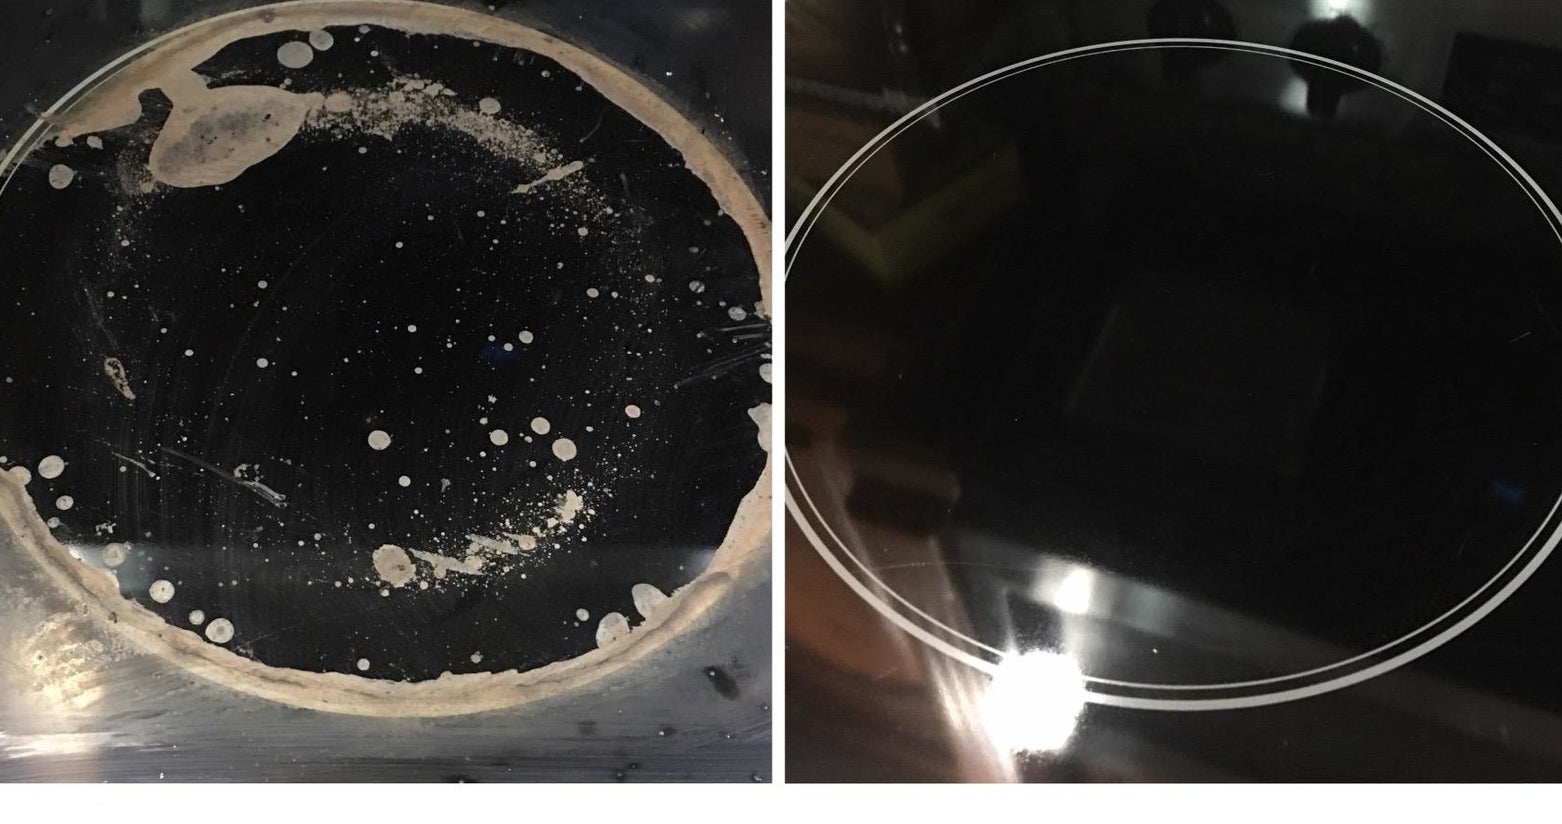 Reviewer photo showing a cooktop before and after using the cleaning kit. The before photo shows heavy staining and the after photo shows a clean shiny cooktop